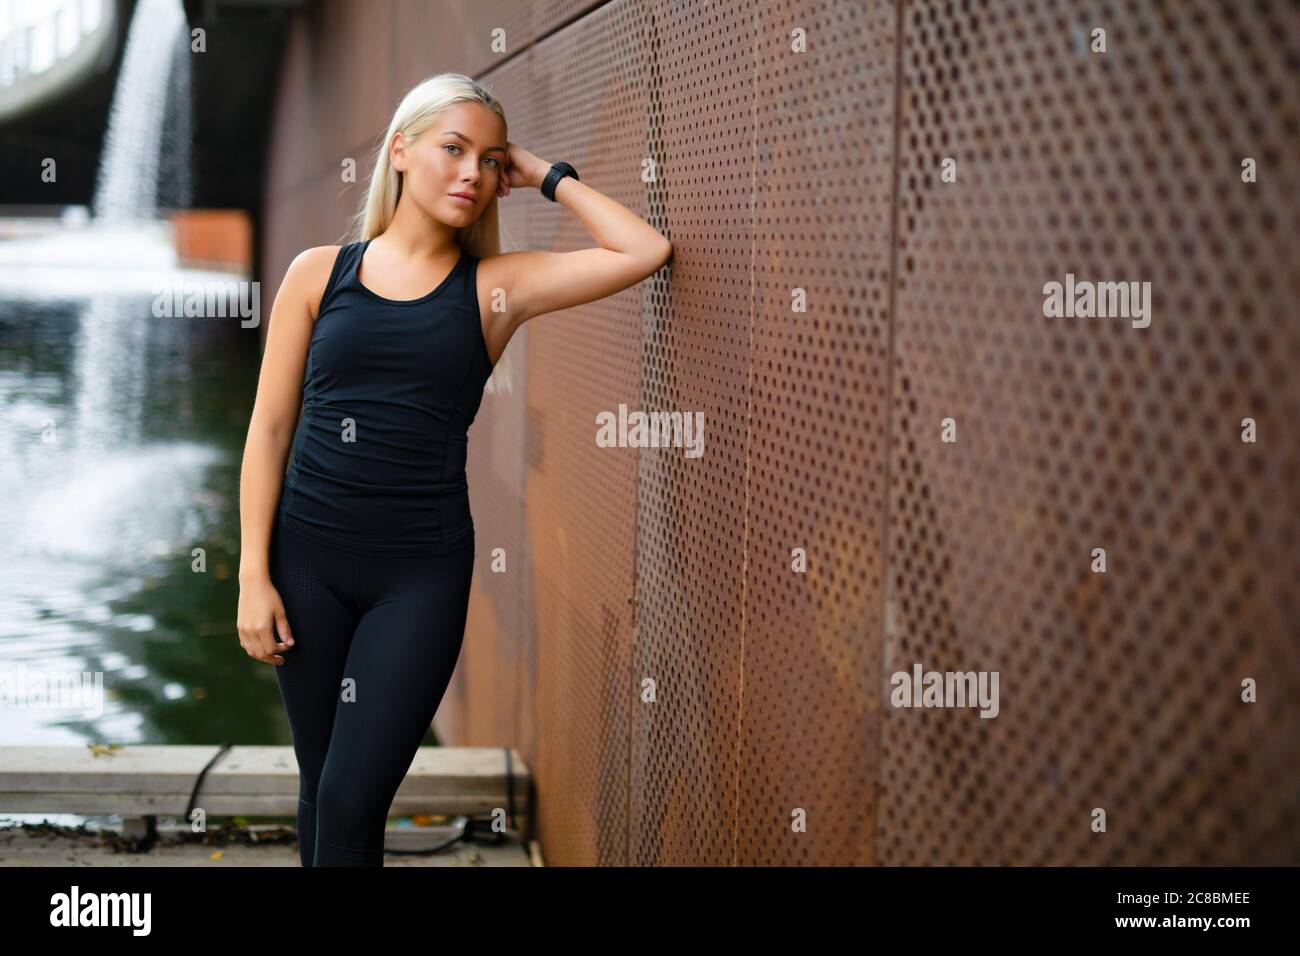 Beautiful Fit Woman in Sportswear Leaning On Metallic Wall After Workout Stock Photo